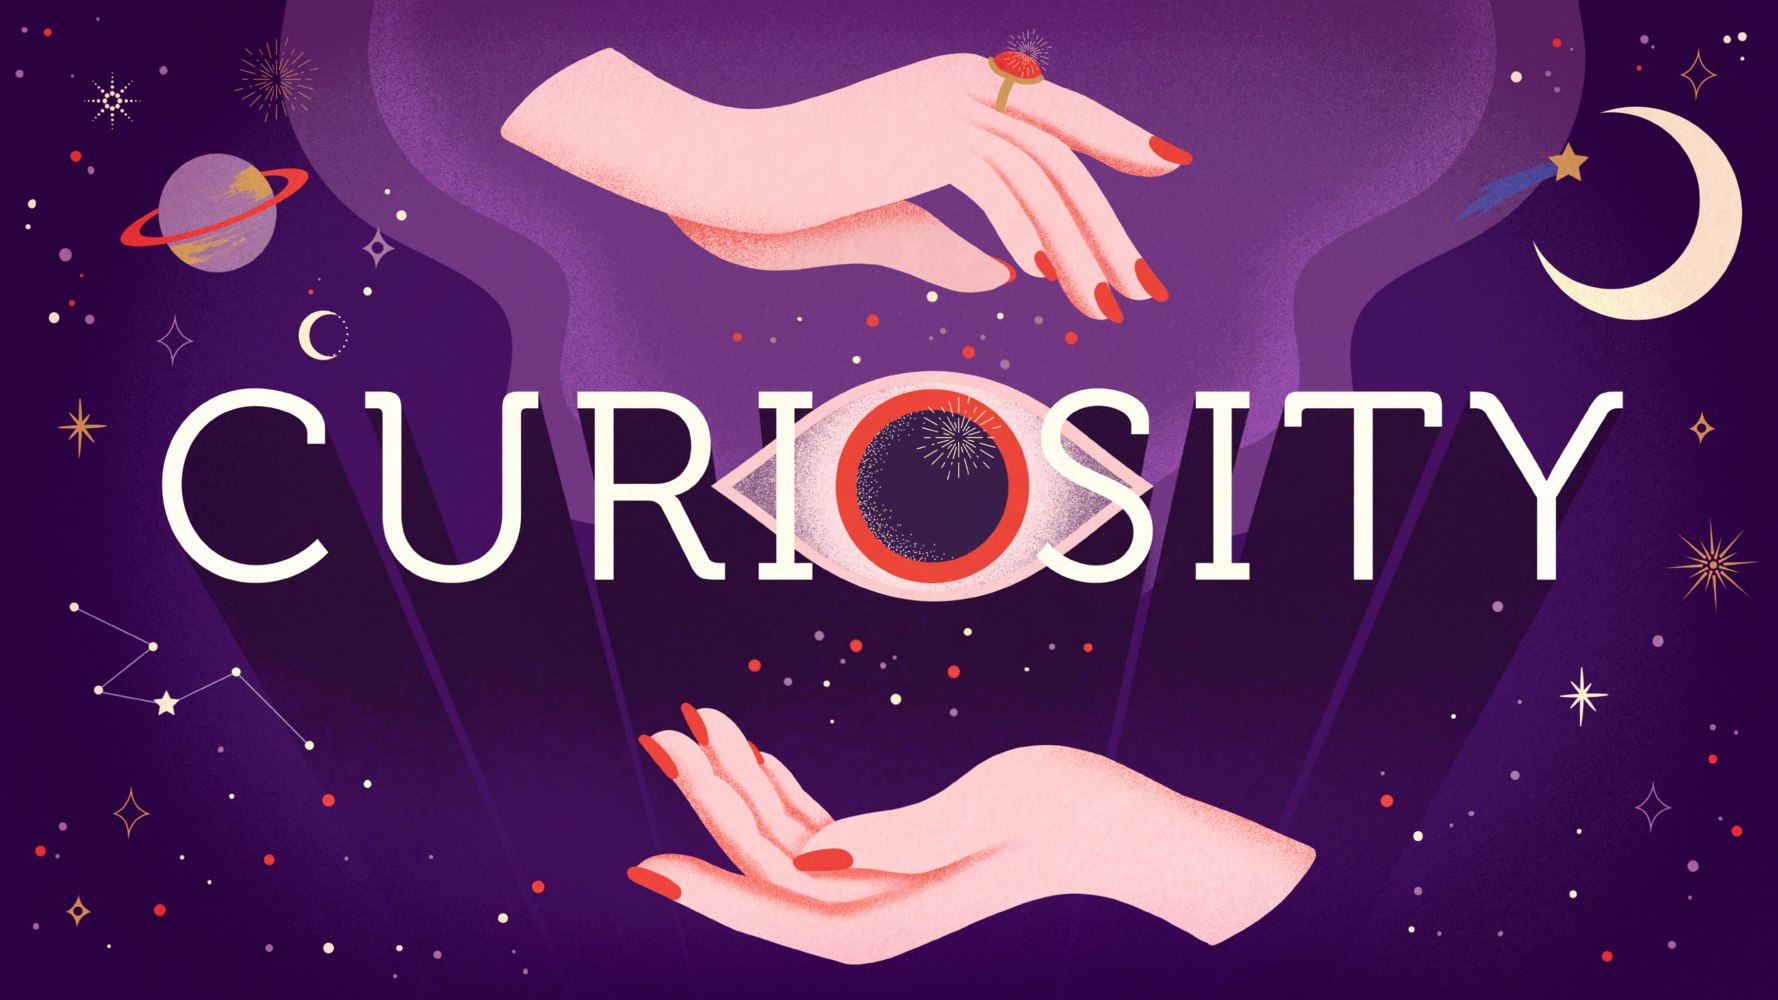 The word Curiosity cupped between two hands, surrounded by planets and stars, and an all-seeing eye.